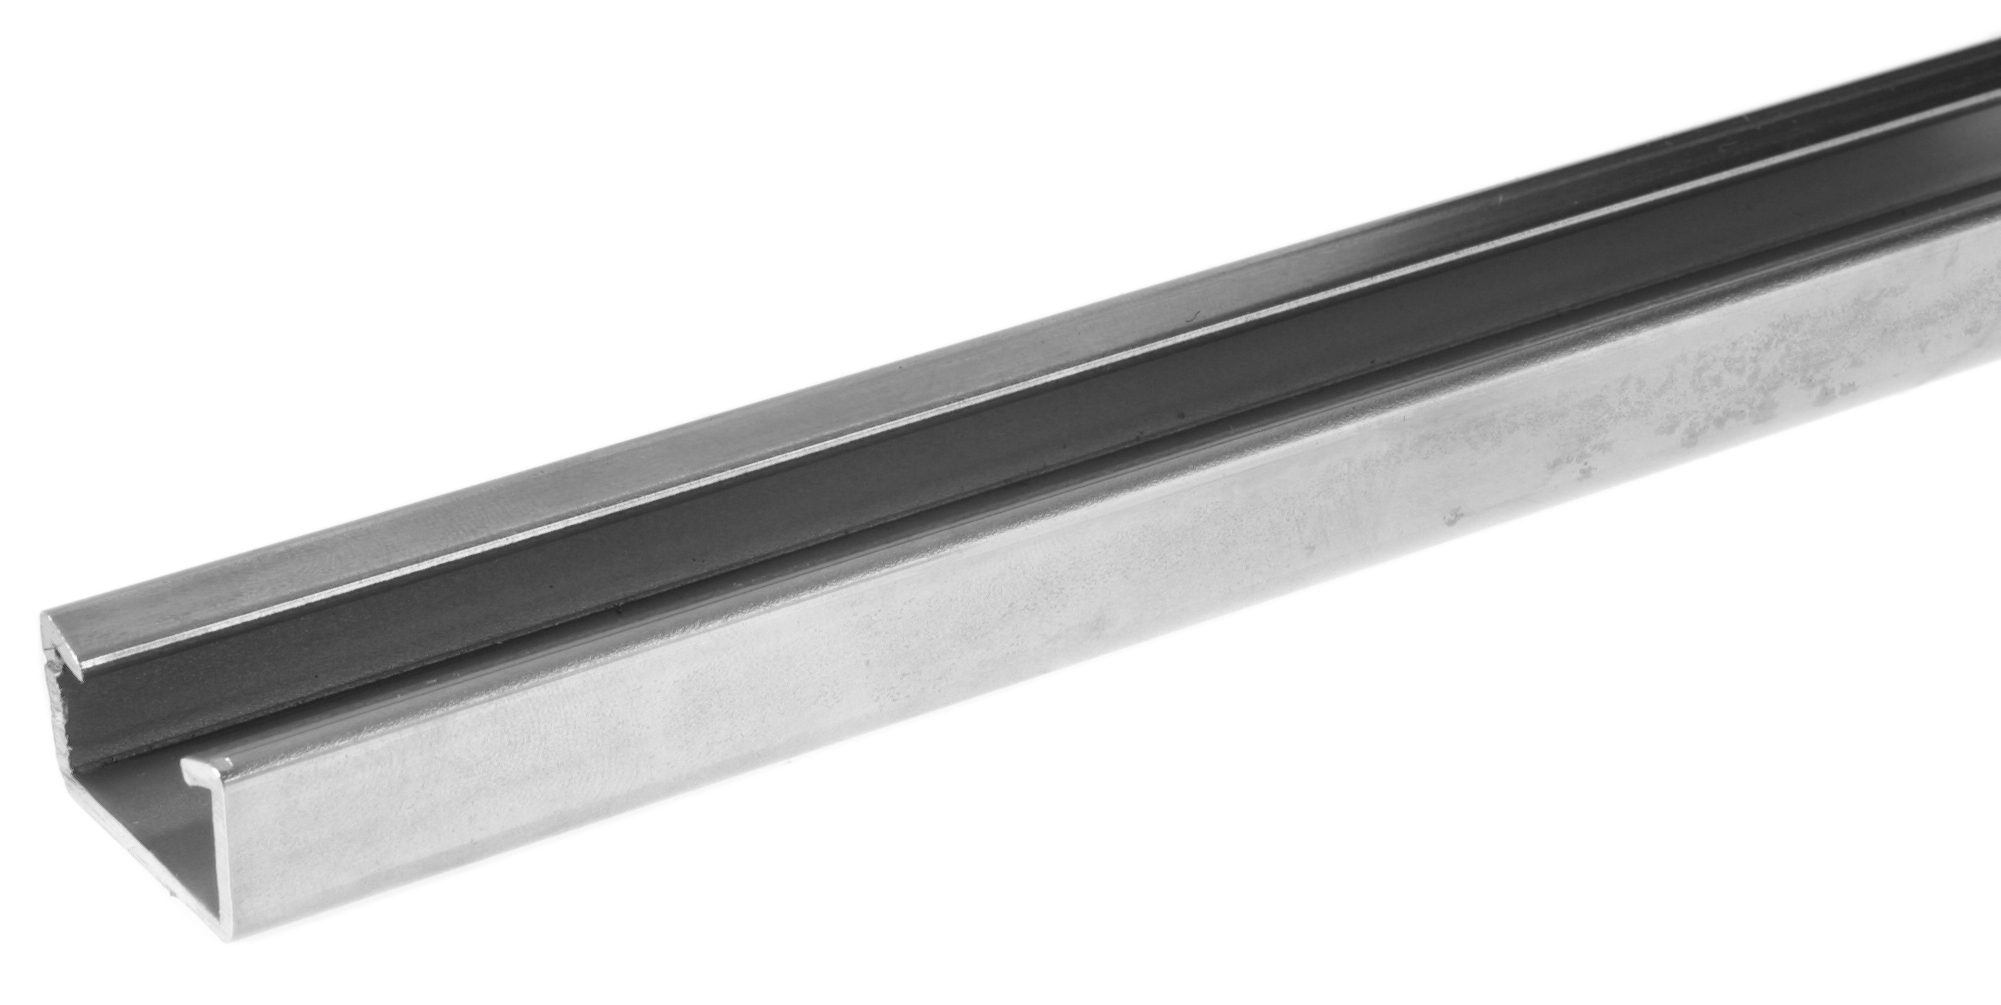 Profile rail C30 stainless steel V2A 3 m